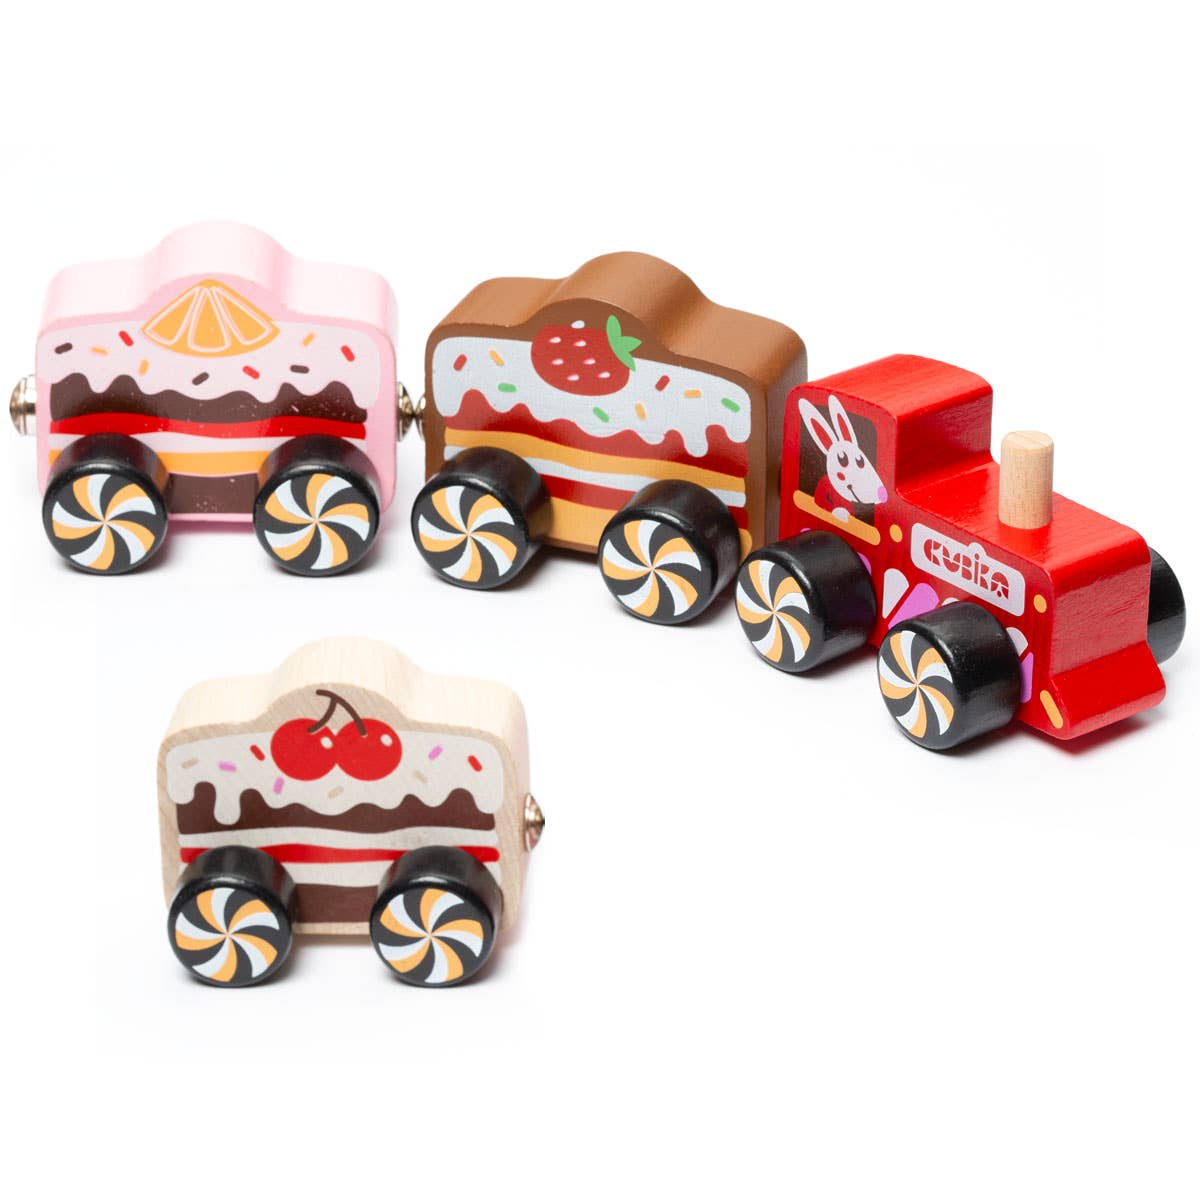 Train "Cakes" - Wooden Toy